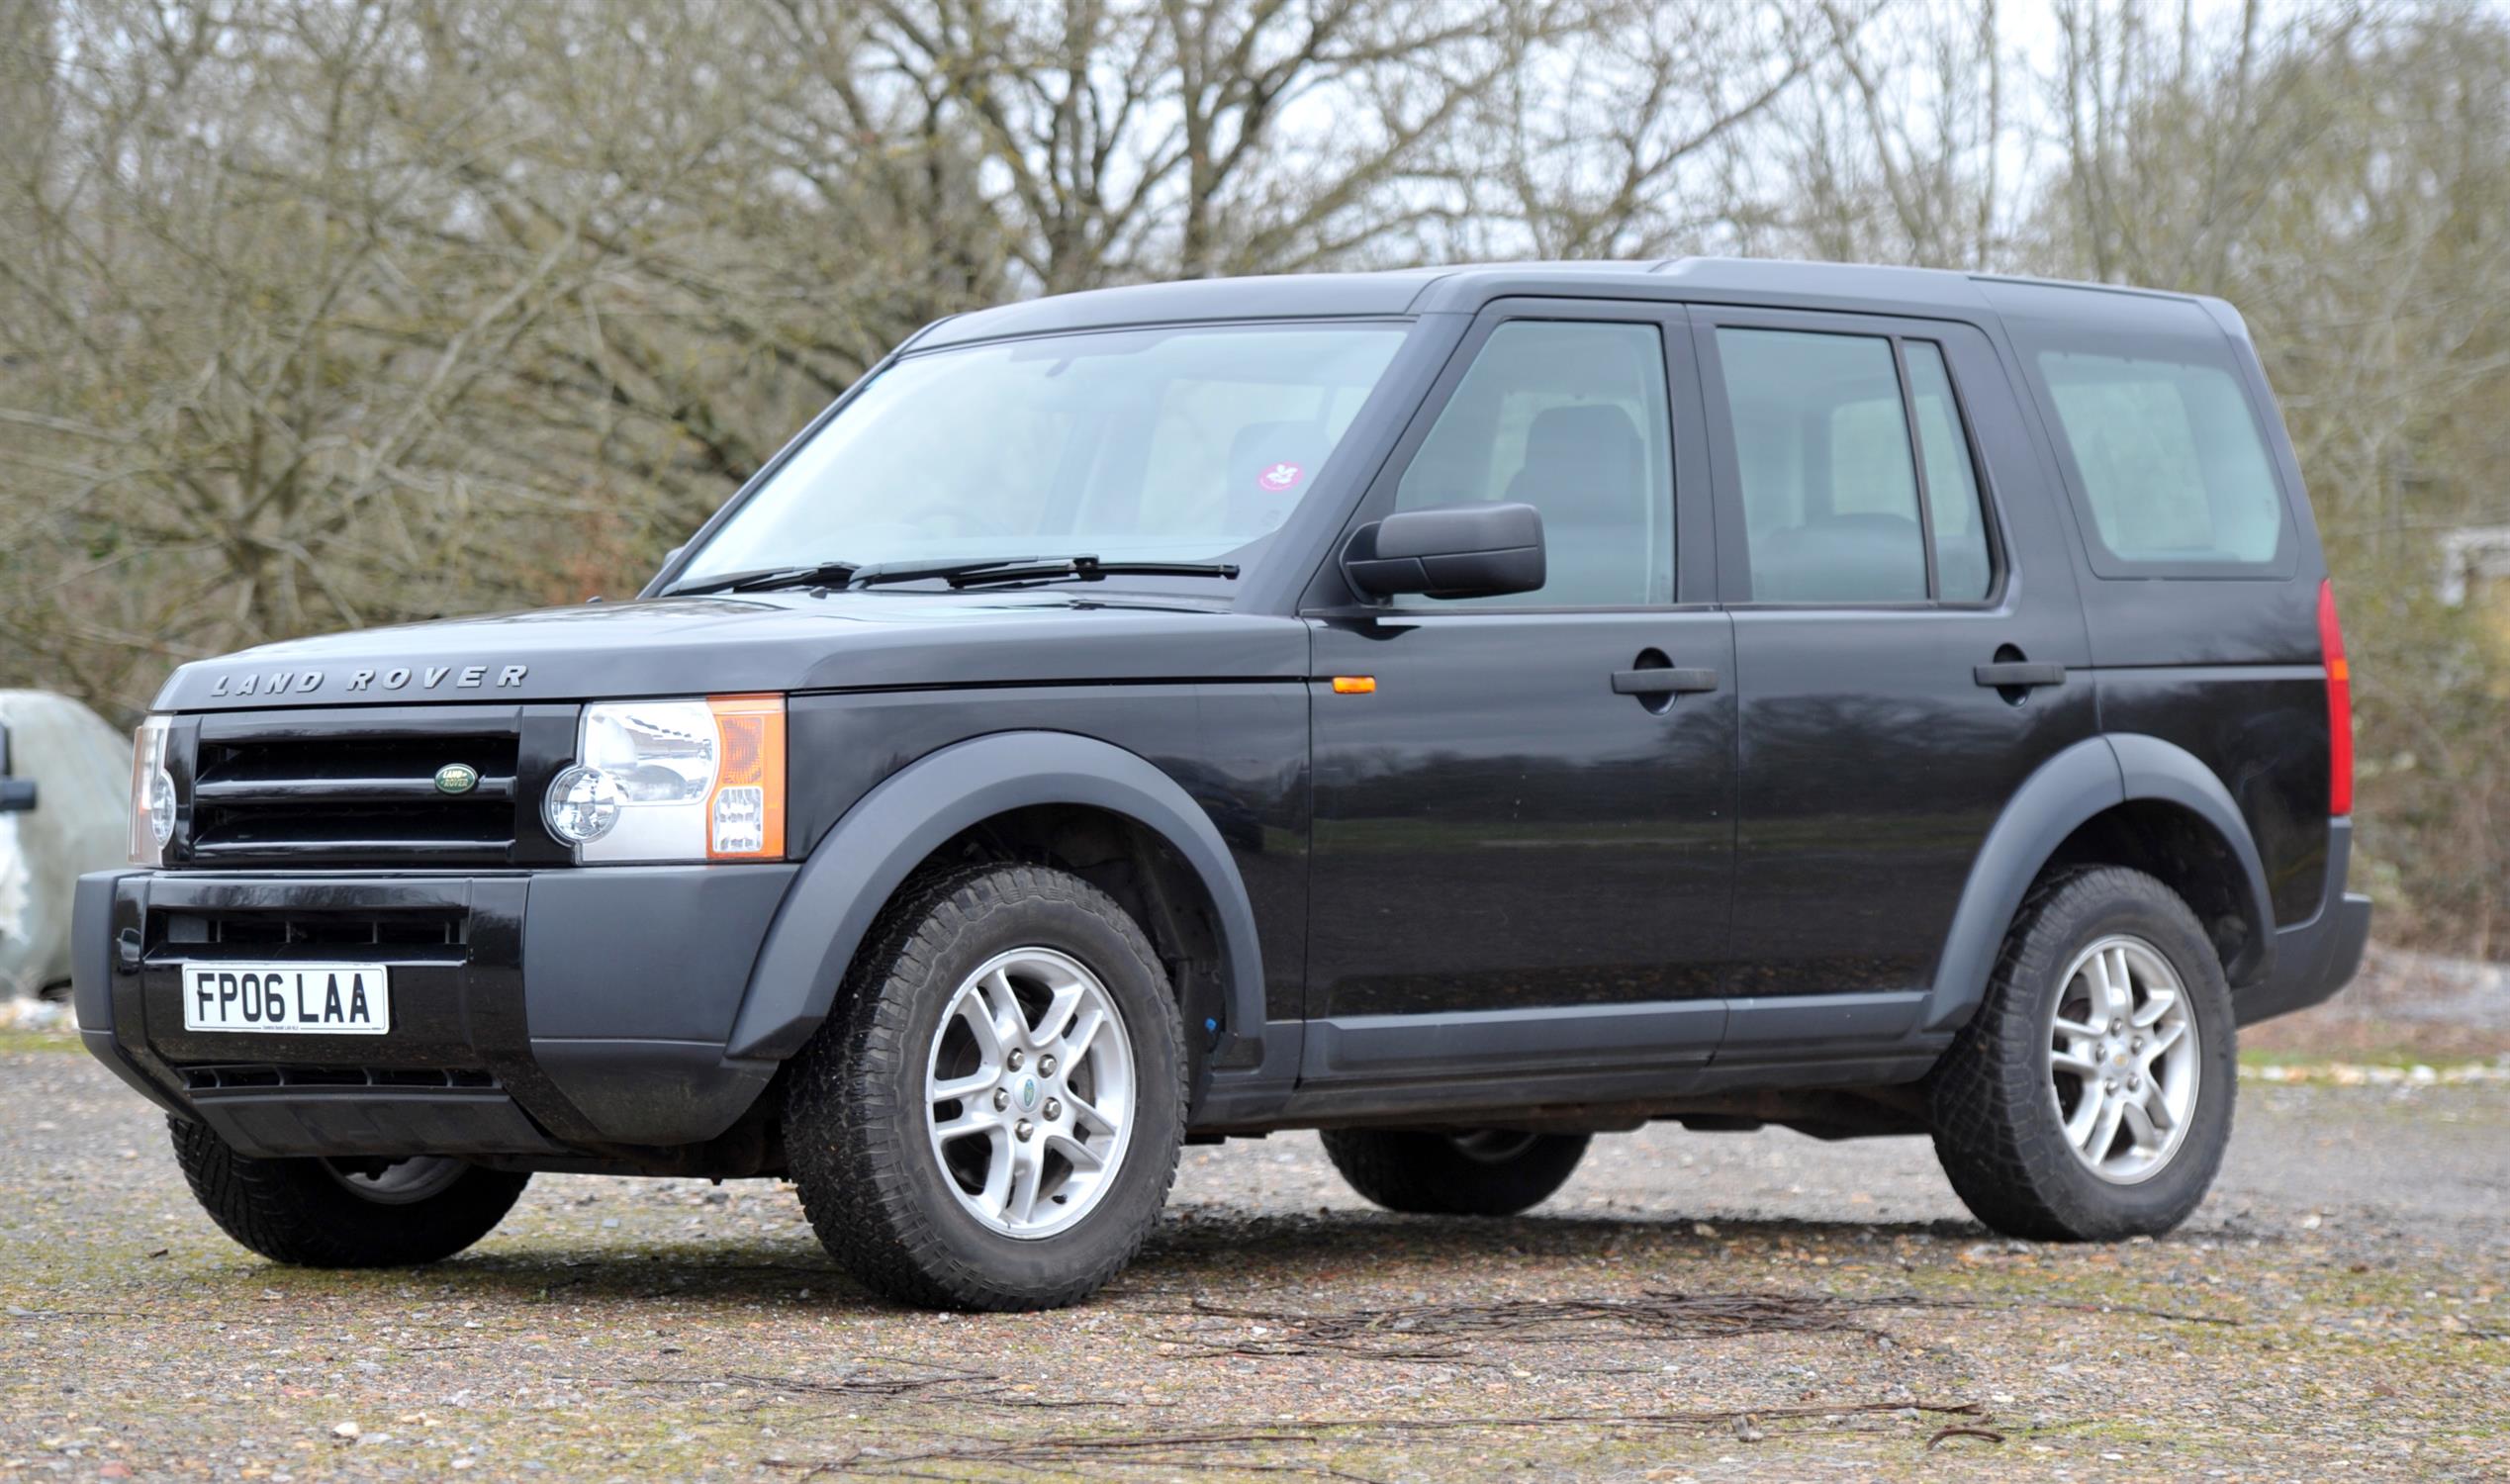 Land Rover Discovery 3 TDV6 Diesel 6 Speed Manual. Registration number: FP06 LAA. Mileage: 125,360. - Image 4 of 12